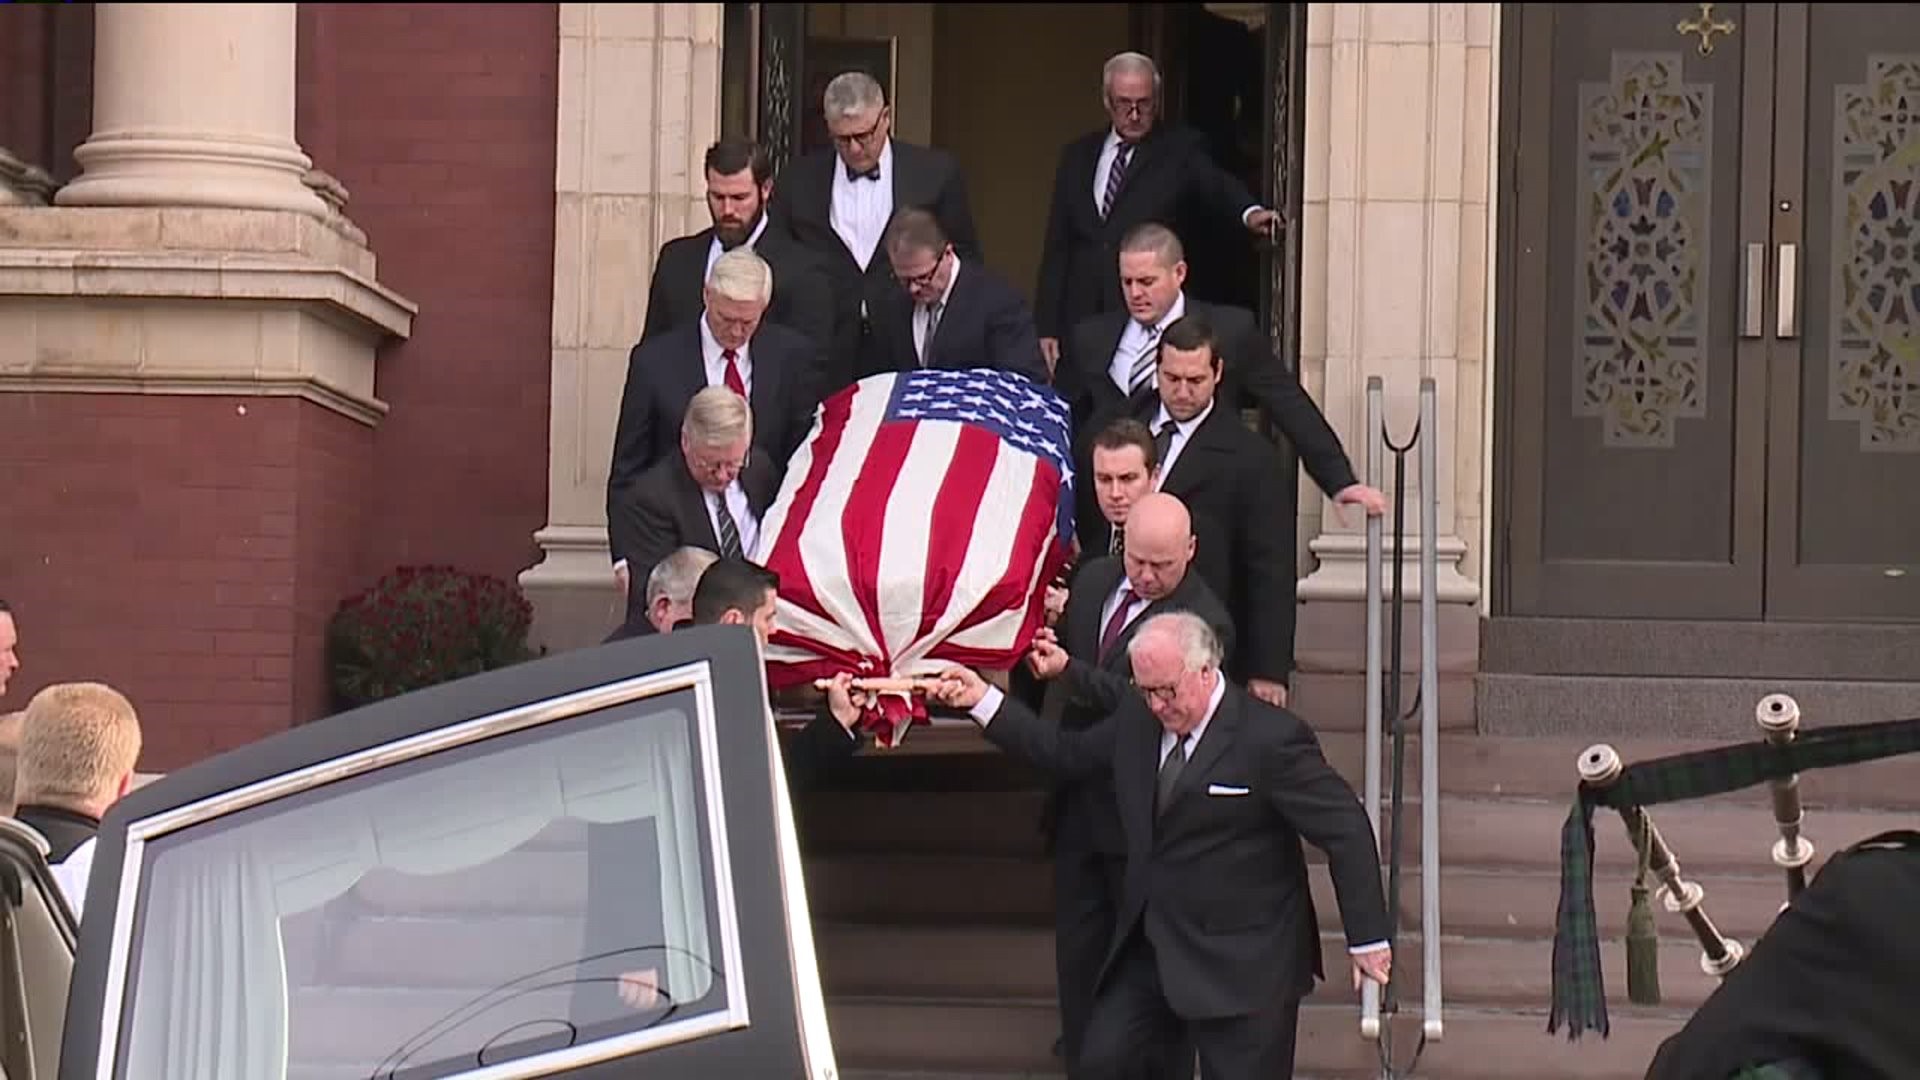 Funeral Service for Judge Richard Conaboy